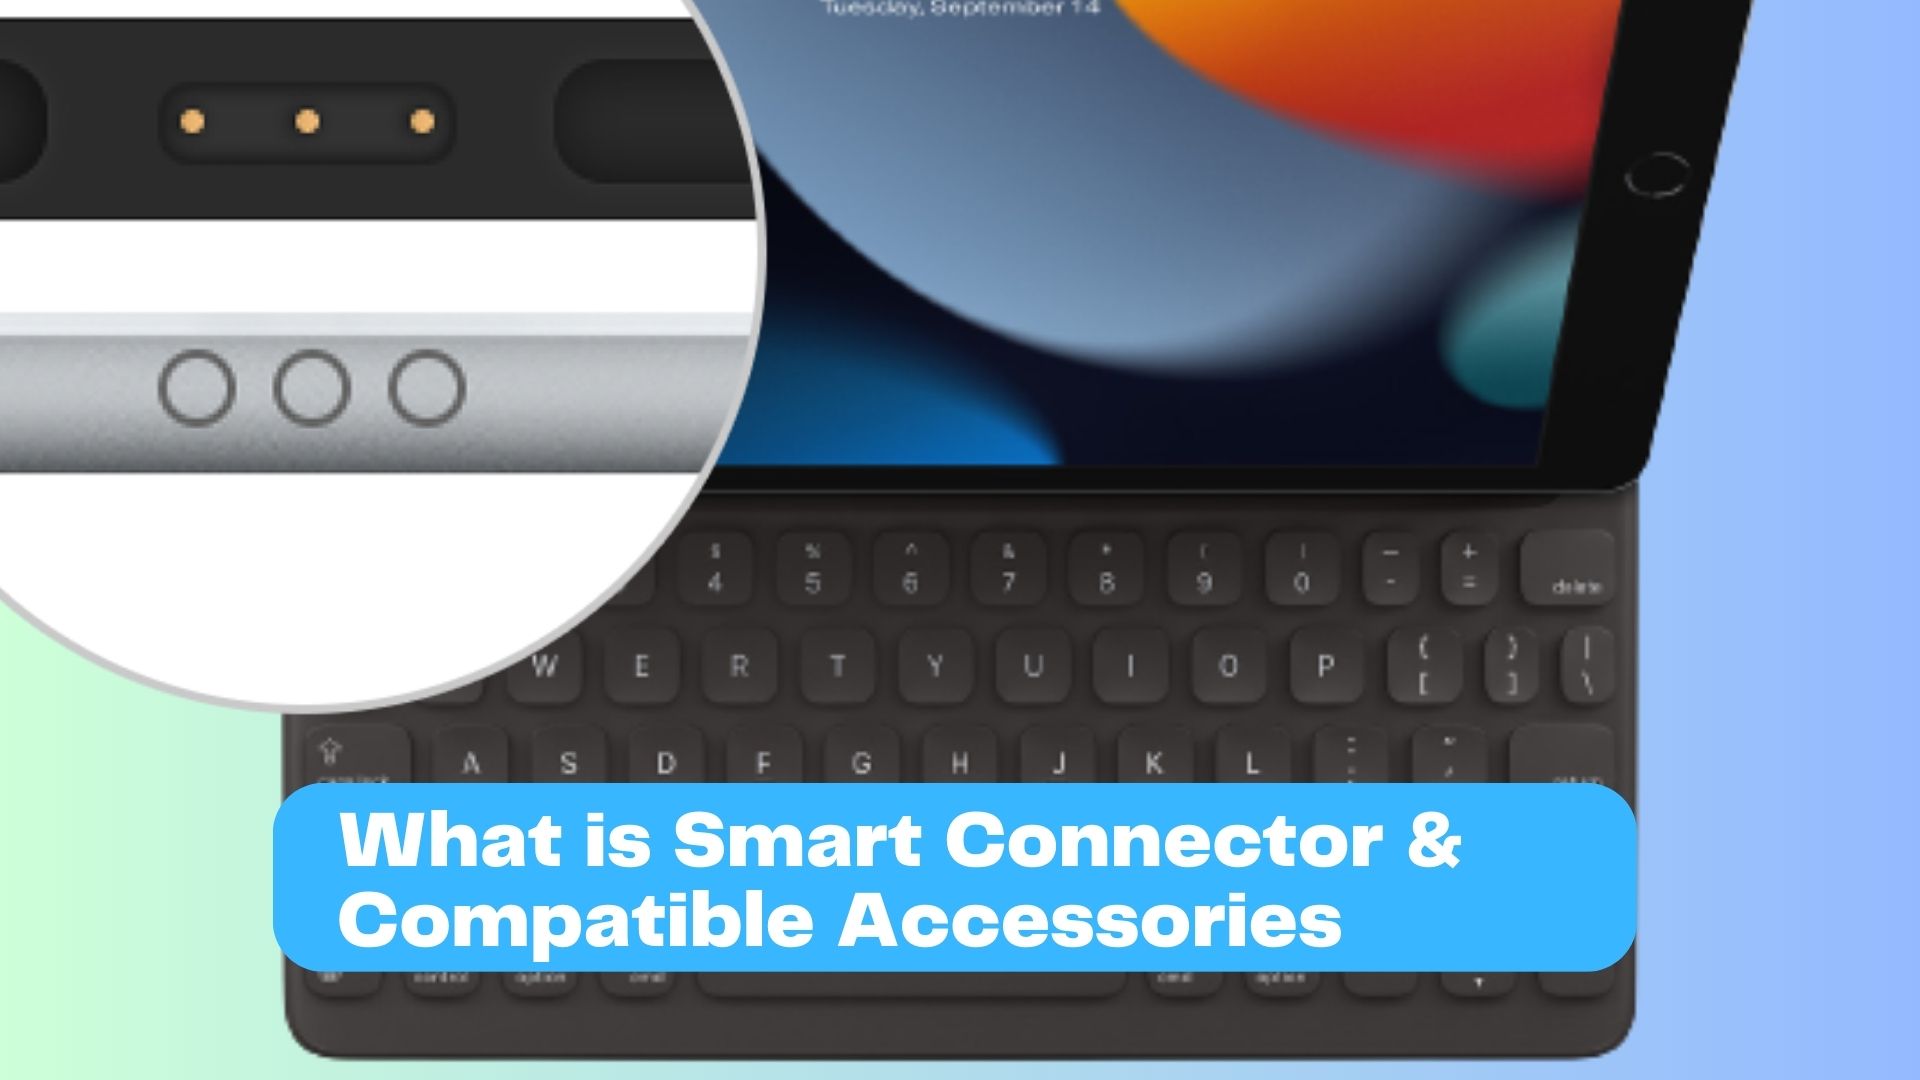 What is the Smart Connector